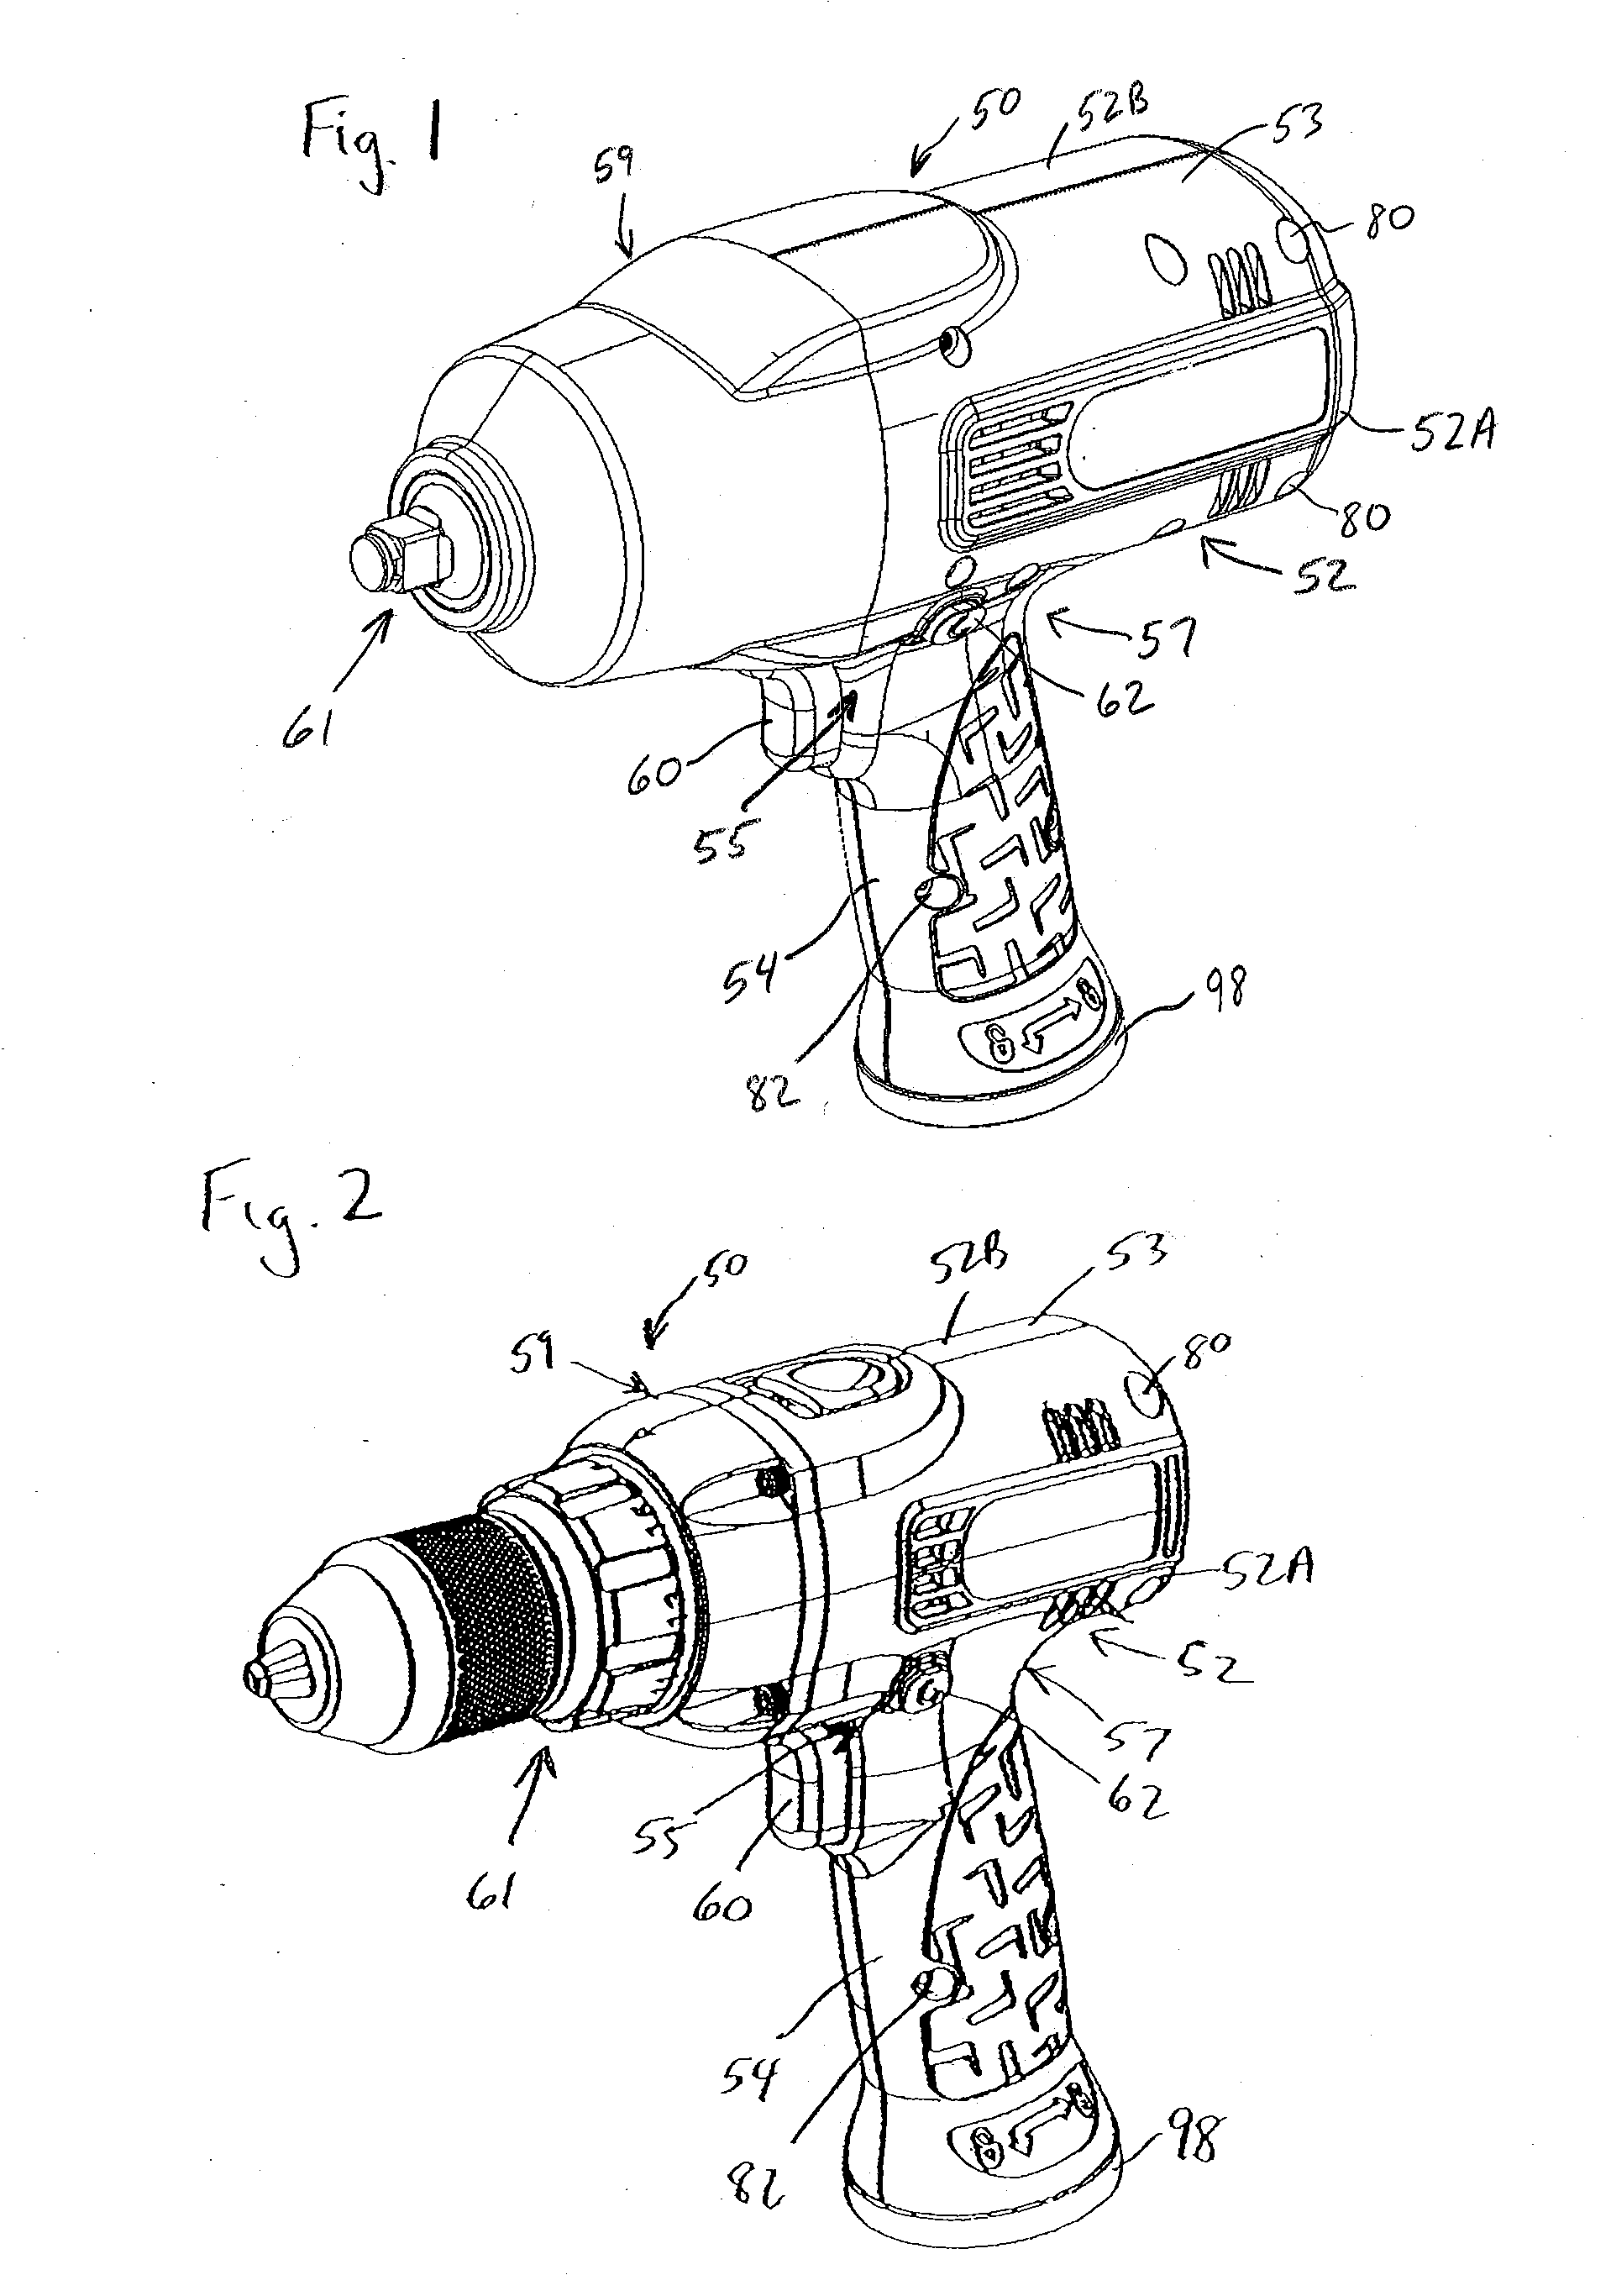 Power tool housing support structures